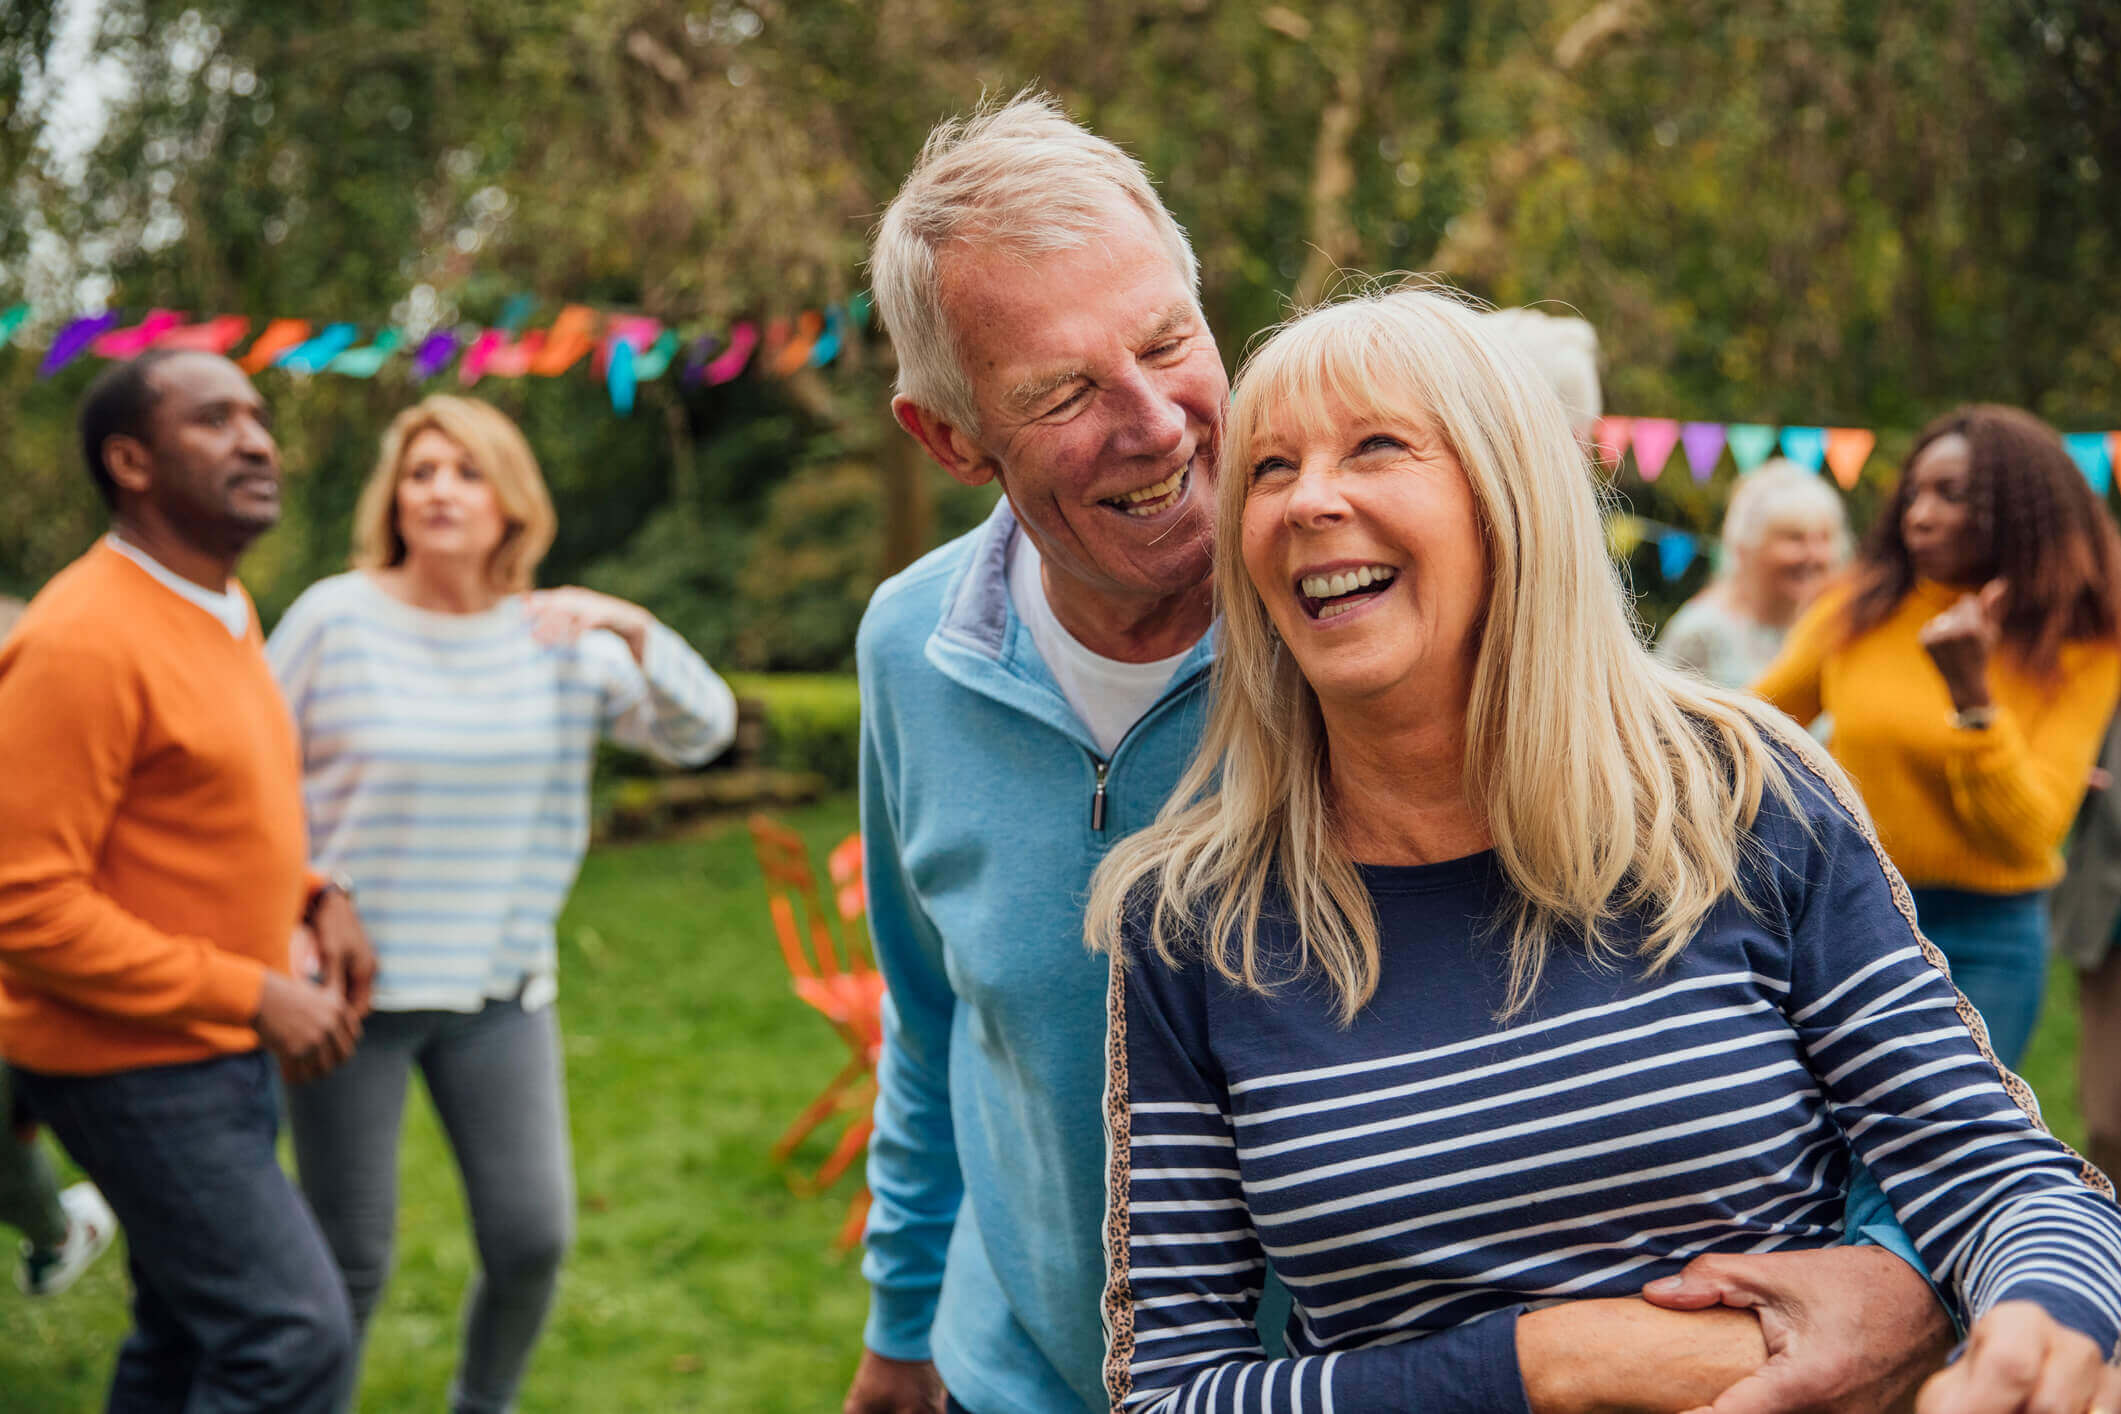 A man and his wife enjoy a cuddle together in the garden at an autumn tea party. Colorful bunting decorate the garden. Groups of people chat and dance in the background.